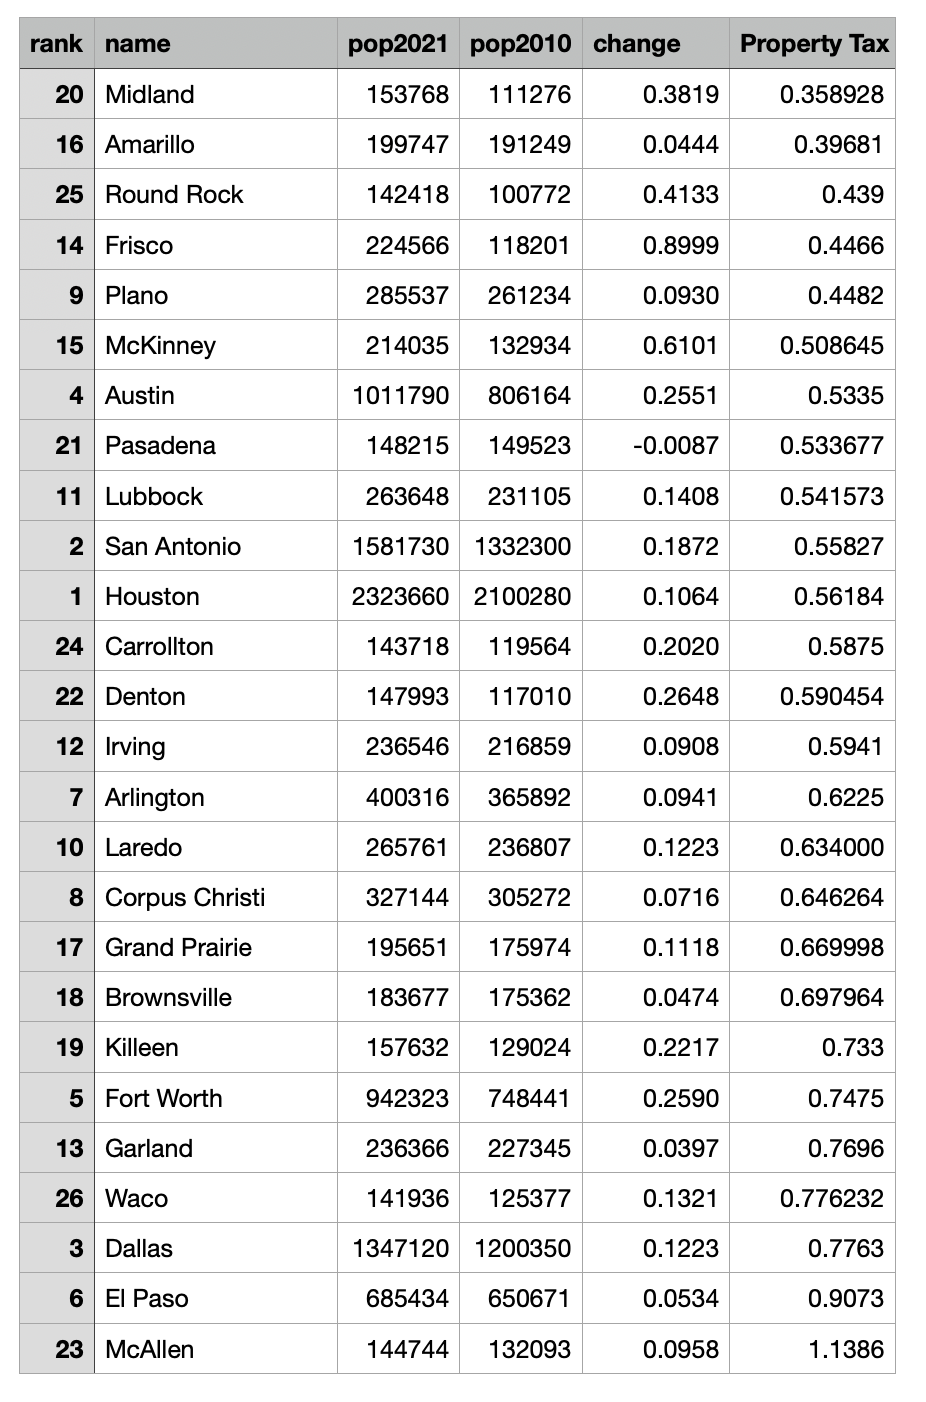 Mark’s fancy table showing Texas cities, population, and property tax rates, in ascending order based on tax rate. The comptroller’s info on Laredo is wrong. It has the property tax rate at 0.00634, which would have put Amarillo in third place. I ha…